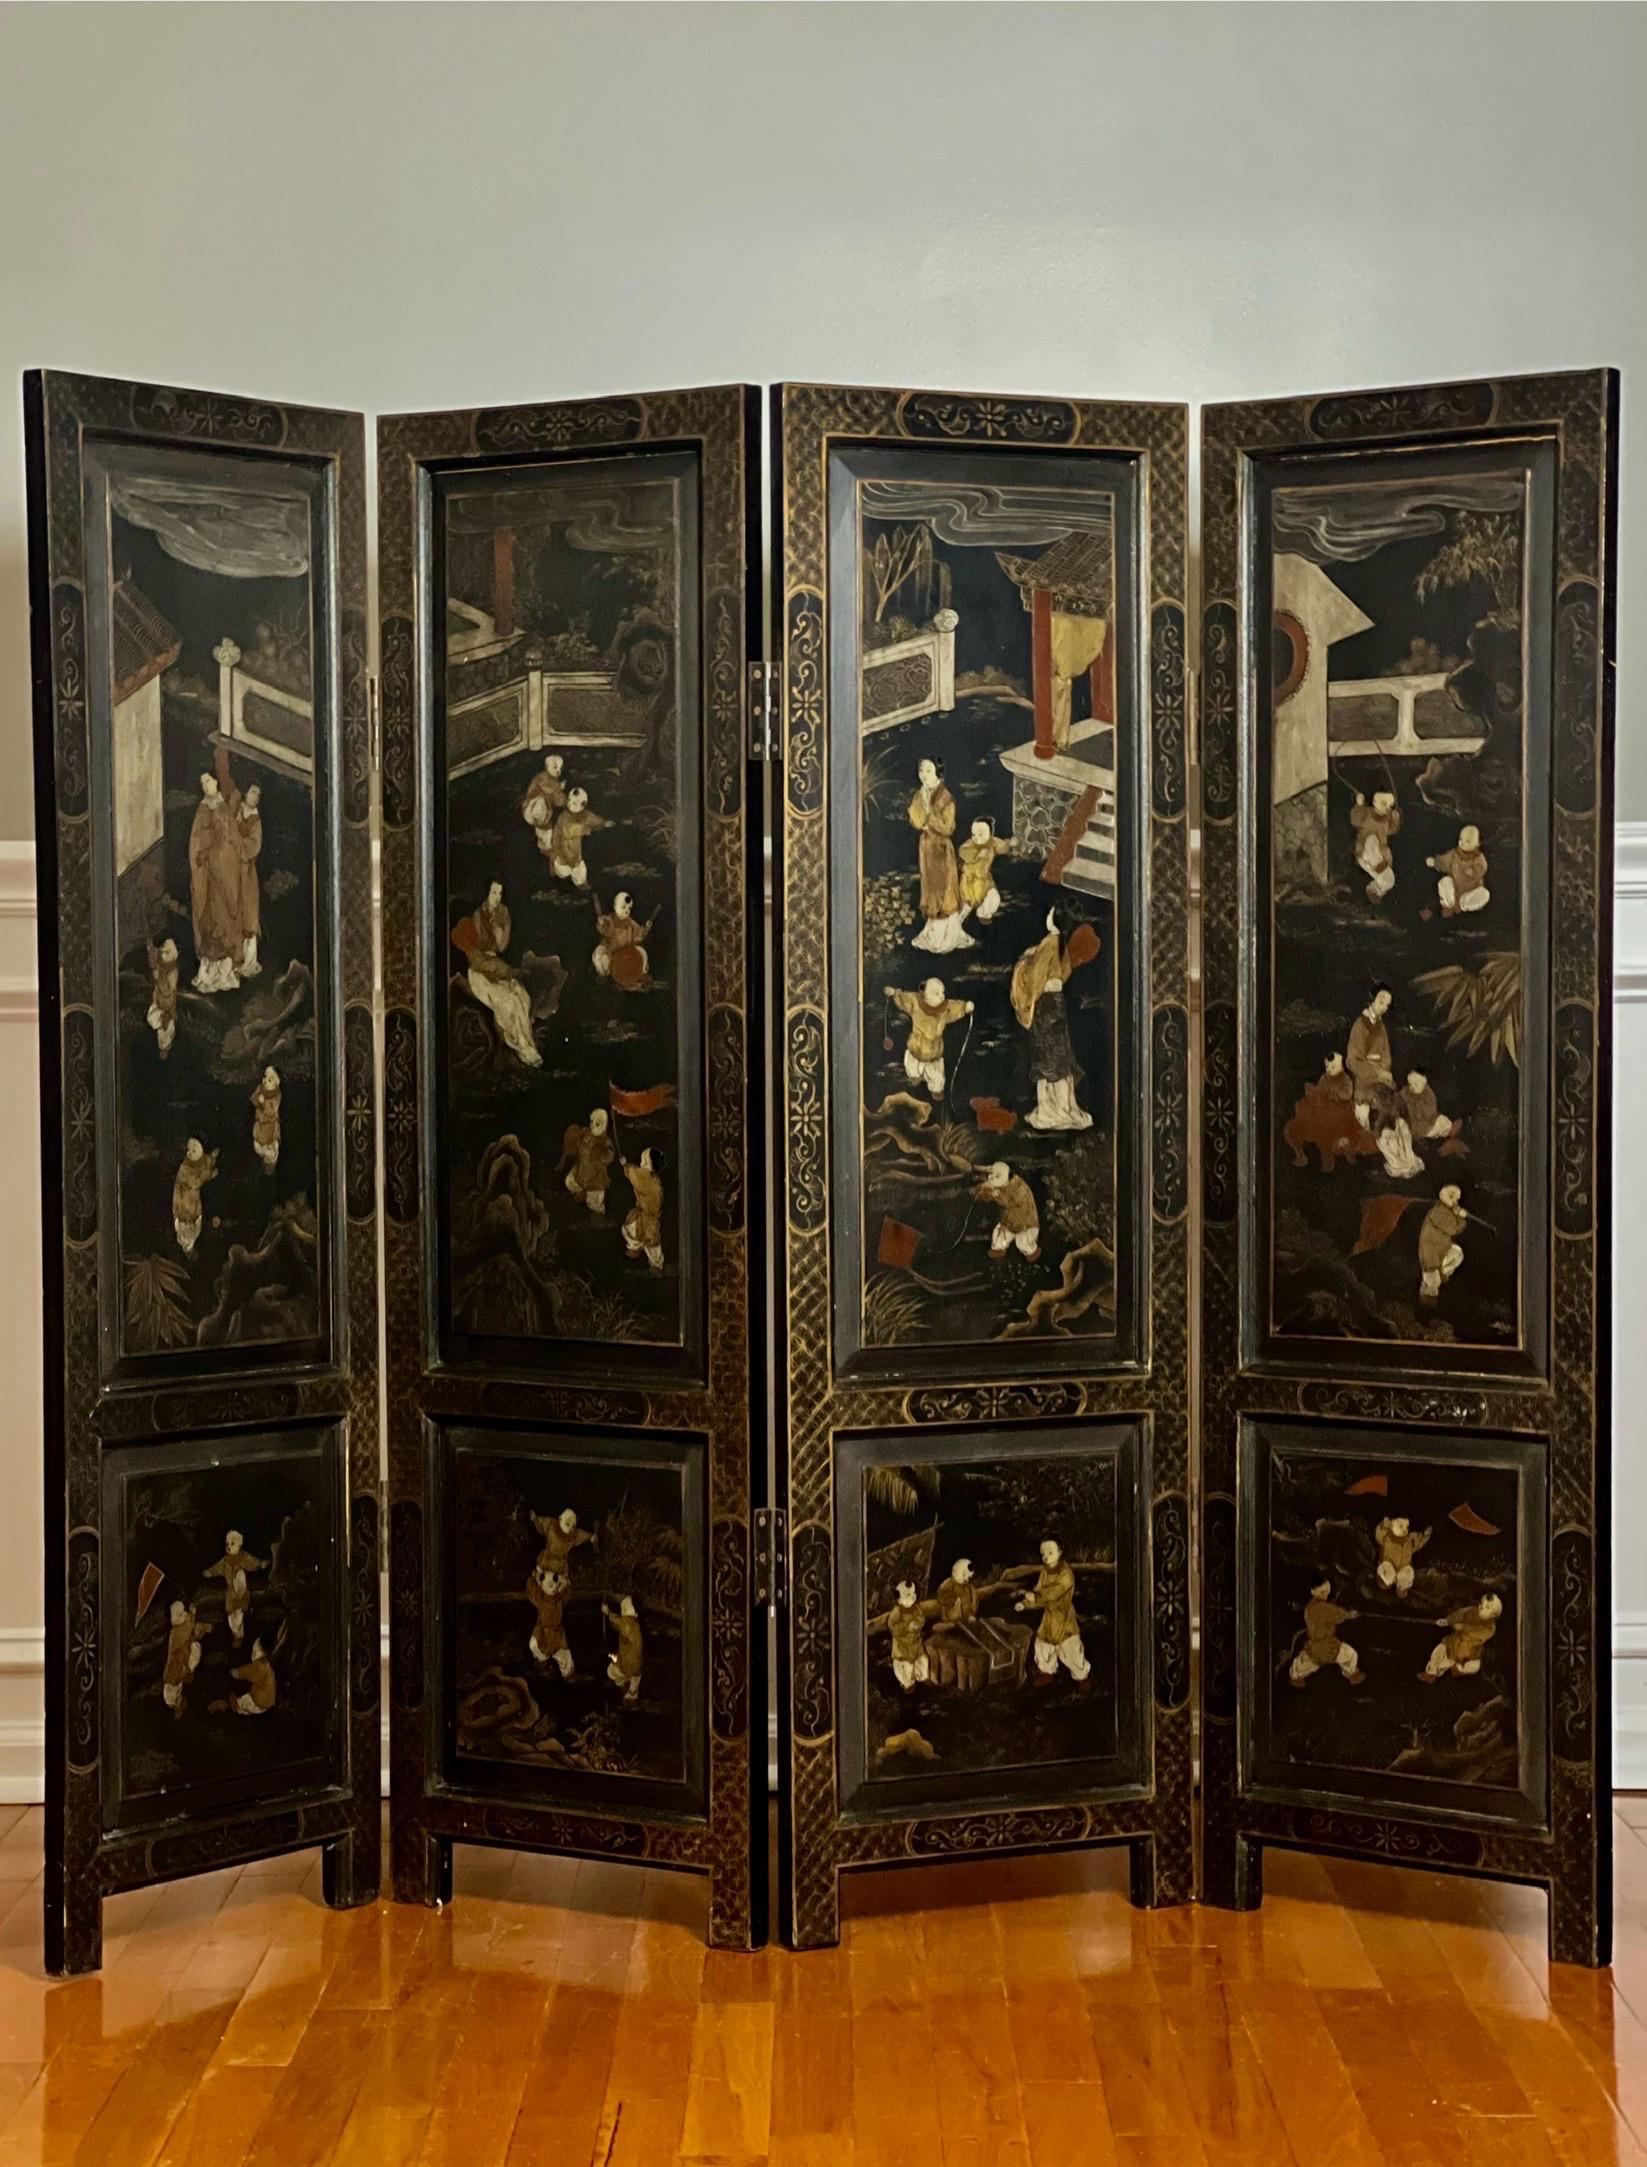 Chinese export smaller scale four-panel lacquered dressing screen room divider with hand-painted decoration on both sides.  

One side depicts a charming continuous pavilion scene with attendants watching over young boys enjoying various fun